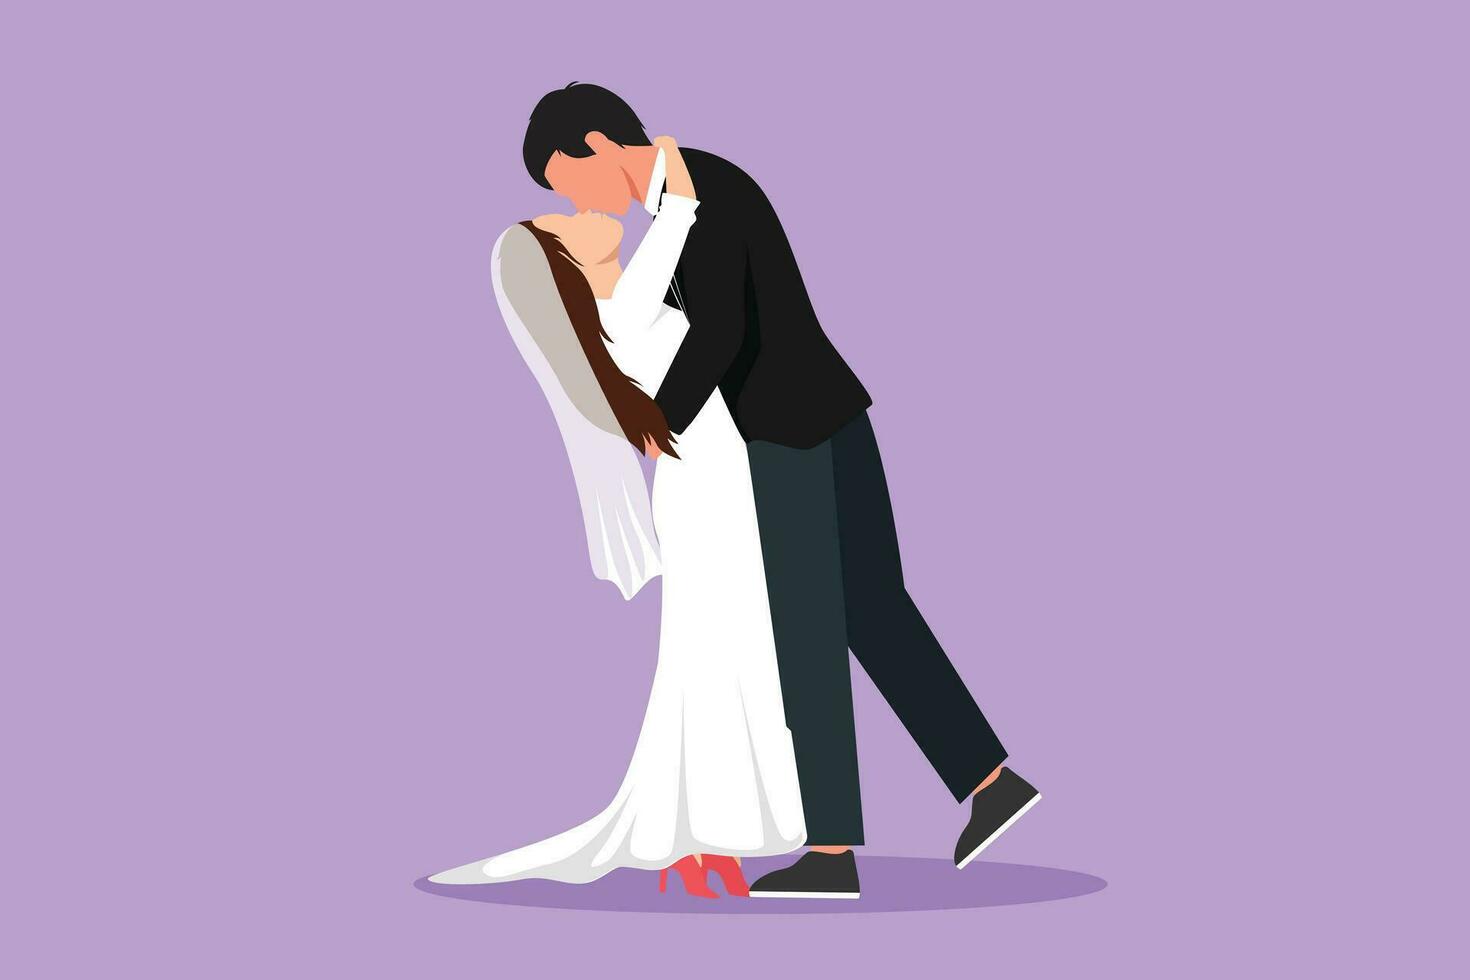 Character flat drawing loving married couple kissing and hugging. Cute young romantic couple lovers kissing. Happy man and beautiful woman prepare for wedding party. Cartoon design vector illustration